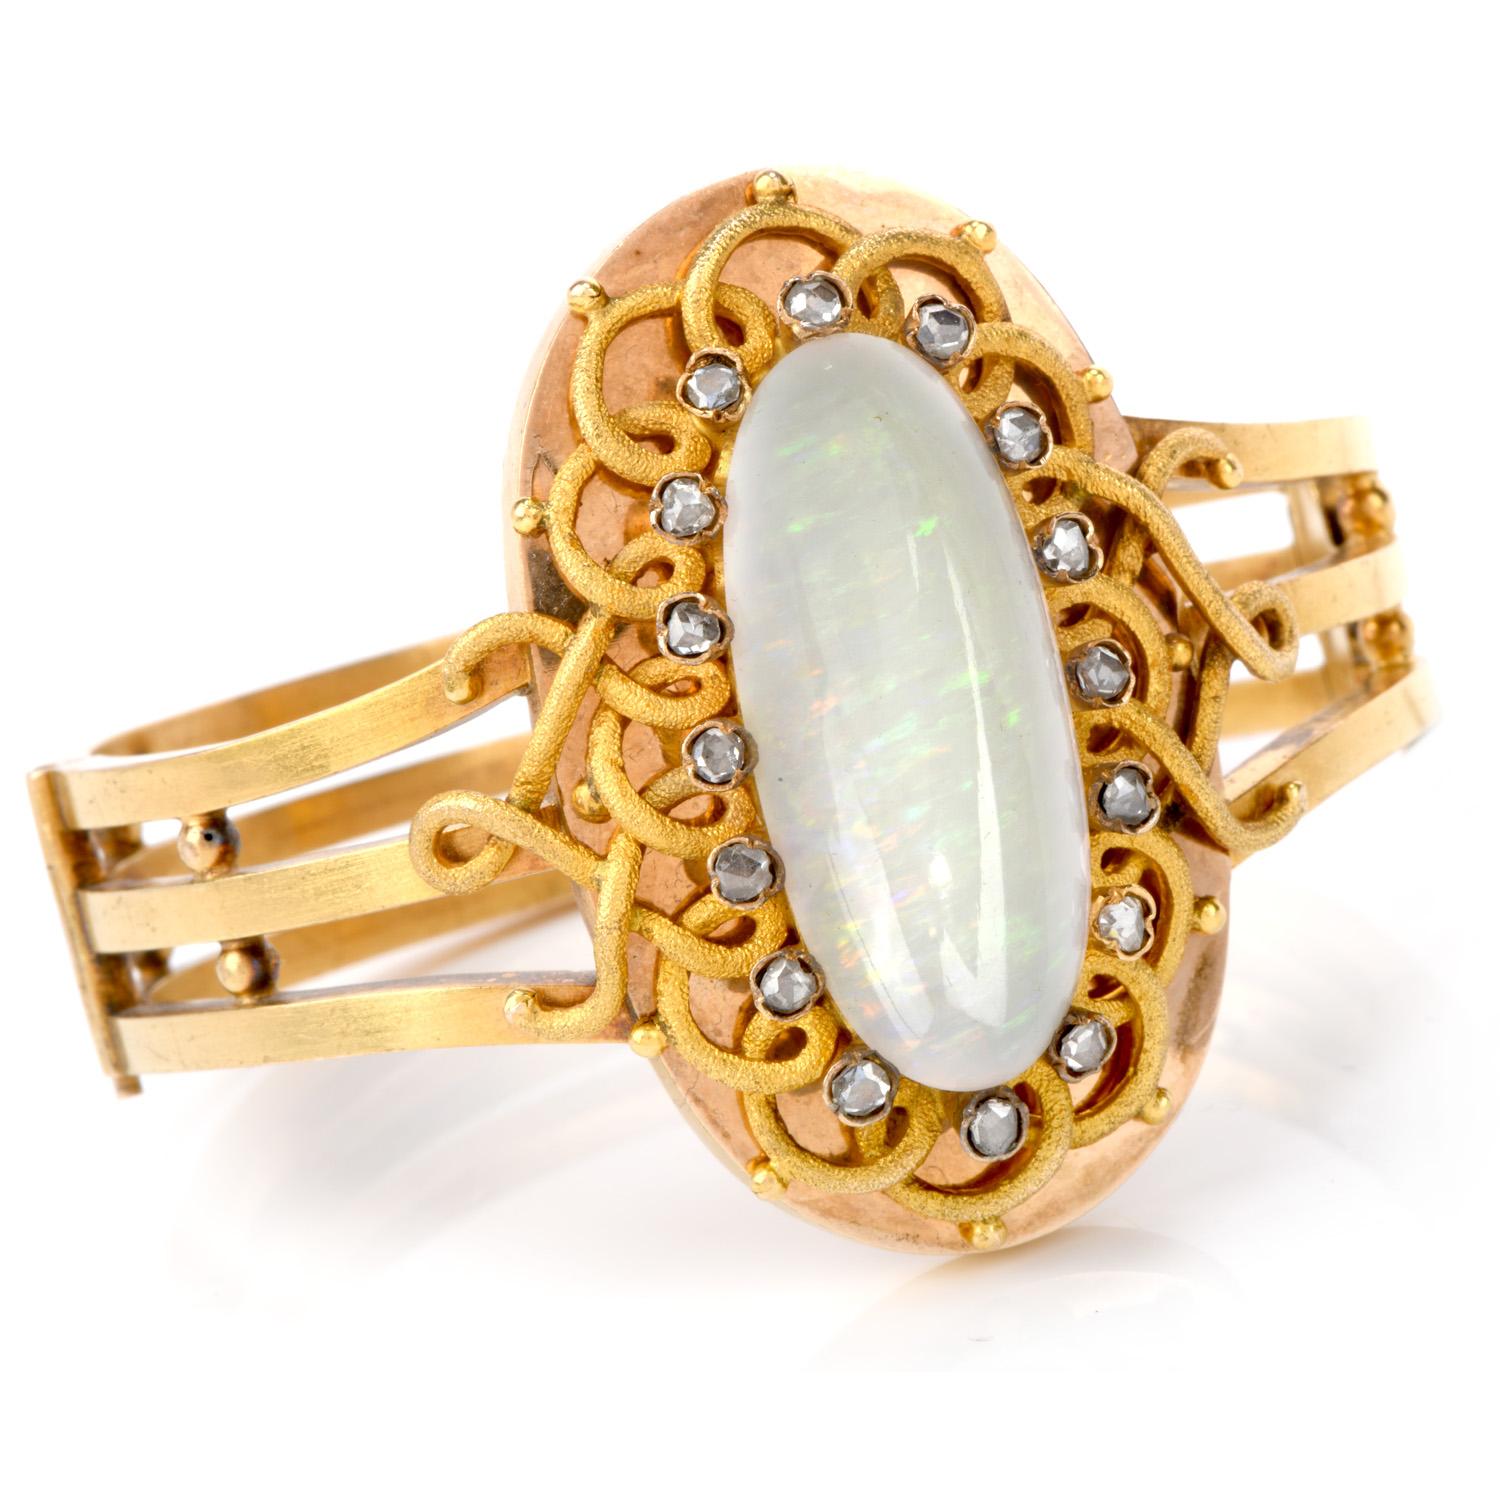 A classic piece from the end of the 19th century is crafted in 14k gold. This Antique Victorian treasure features an opal measuring approx. 30mm x 13mm, weighing approx. 12.70 carats, surrounded by 15 rose-cut diamond weighing approx. 0.60 carats